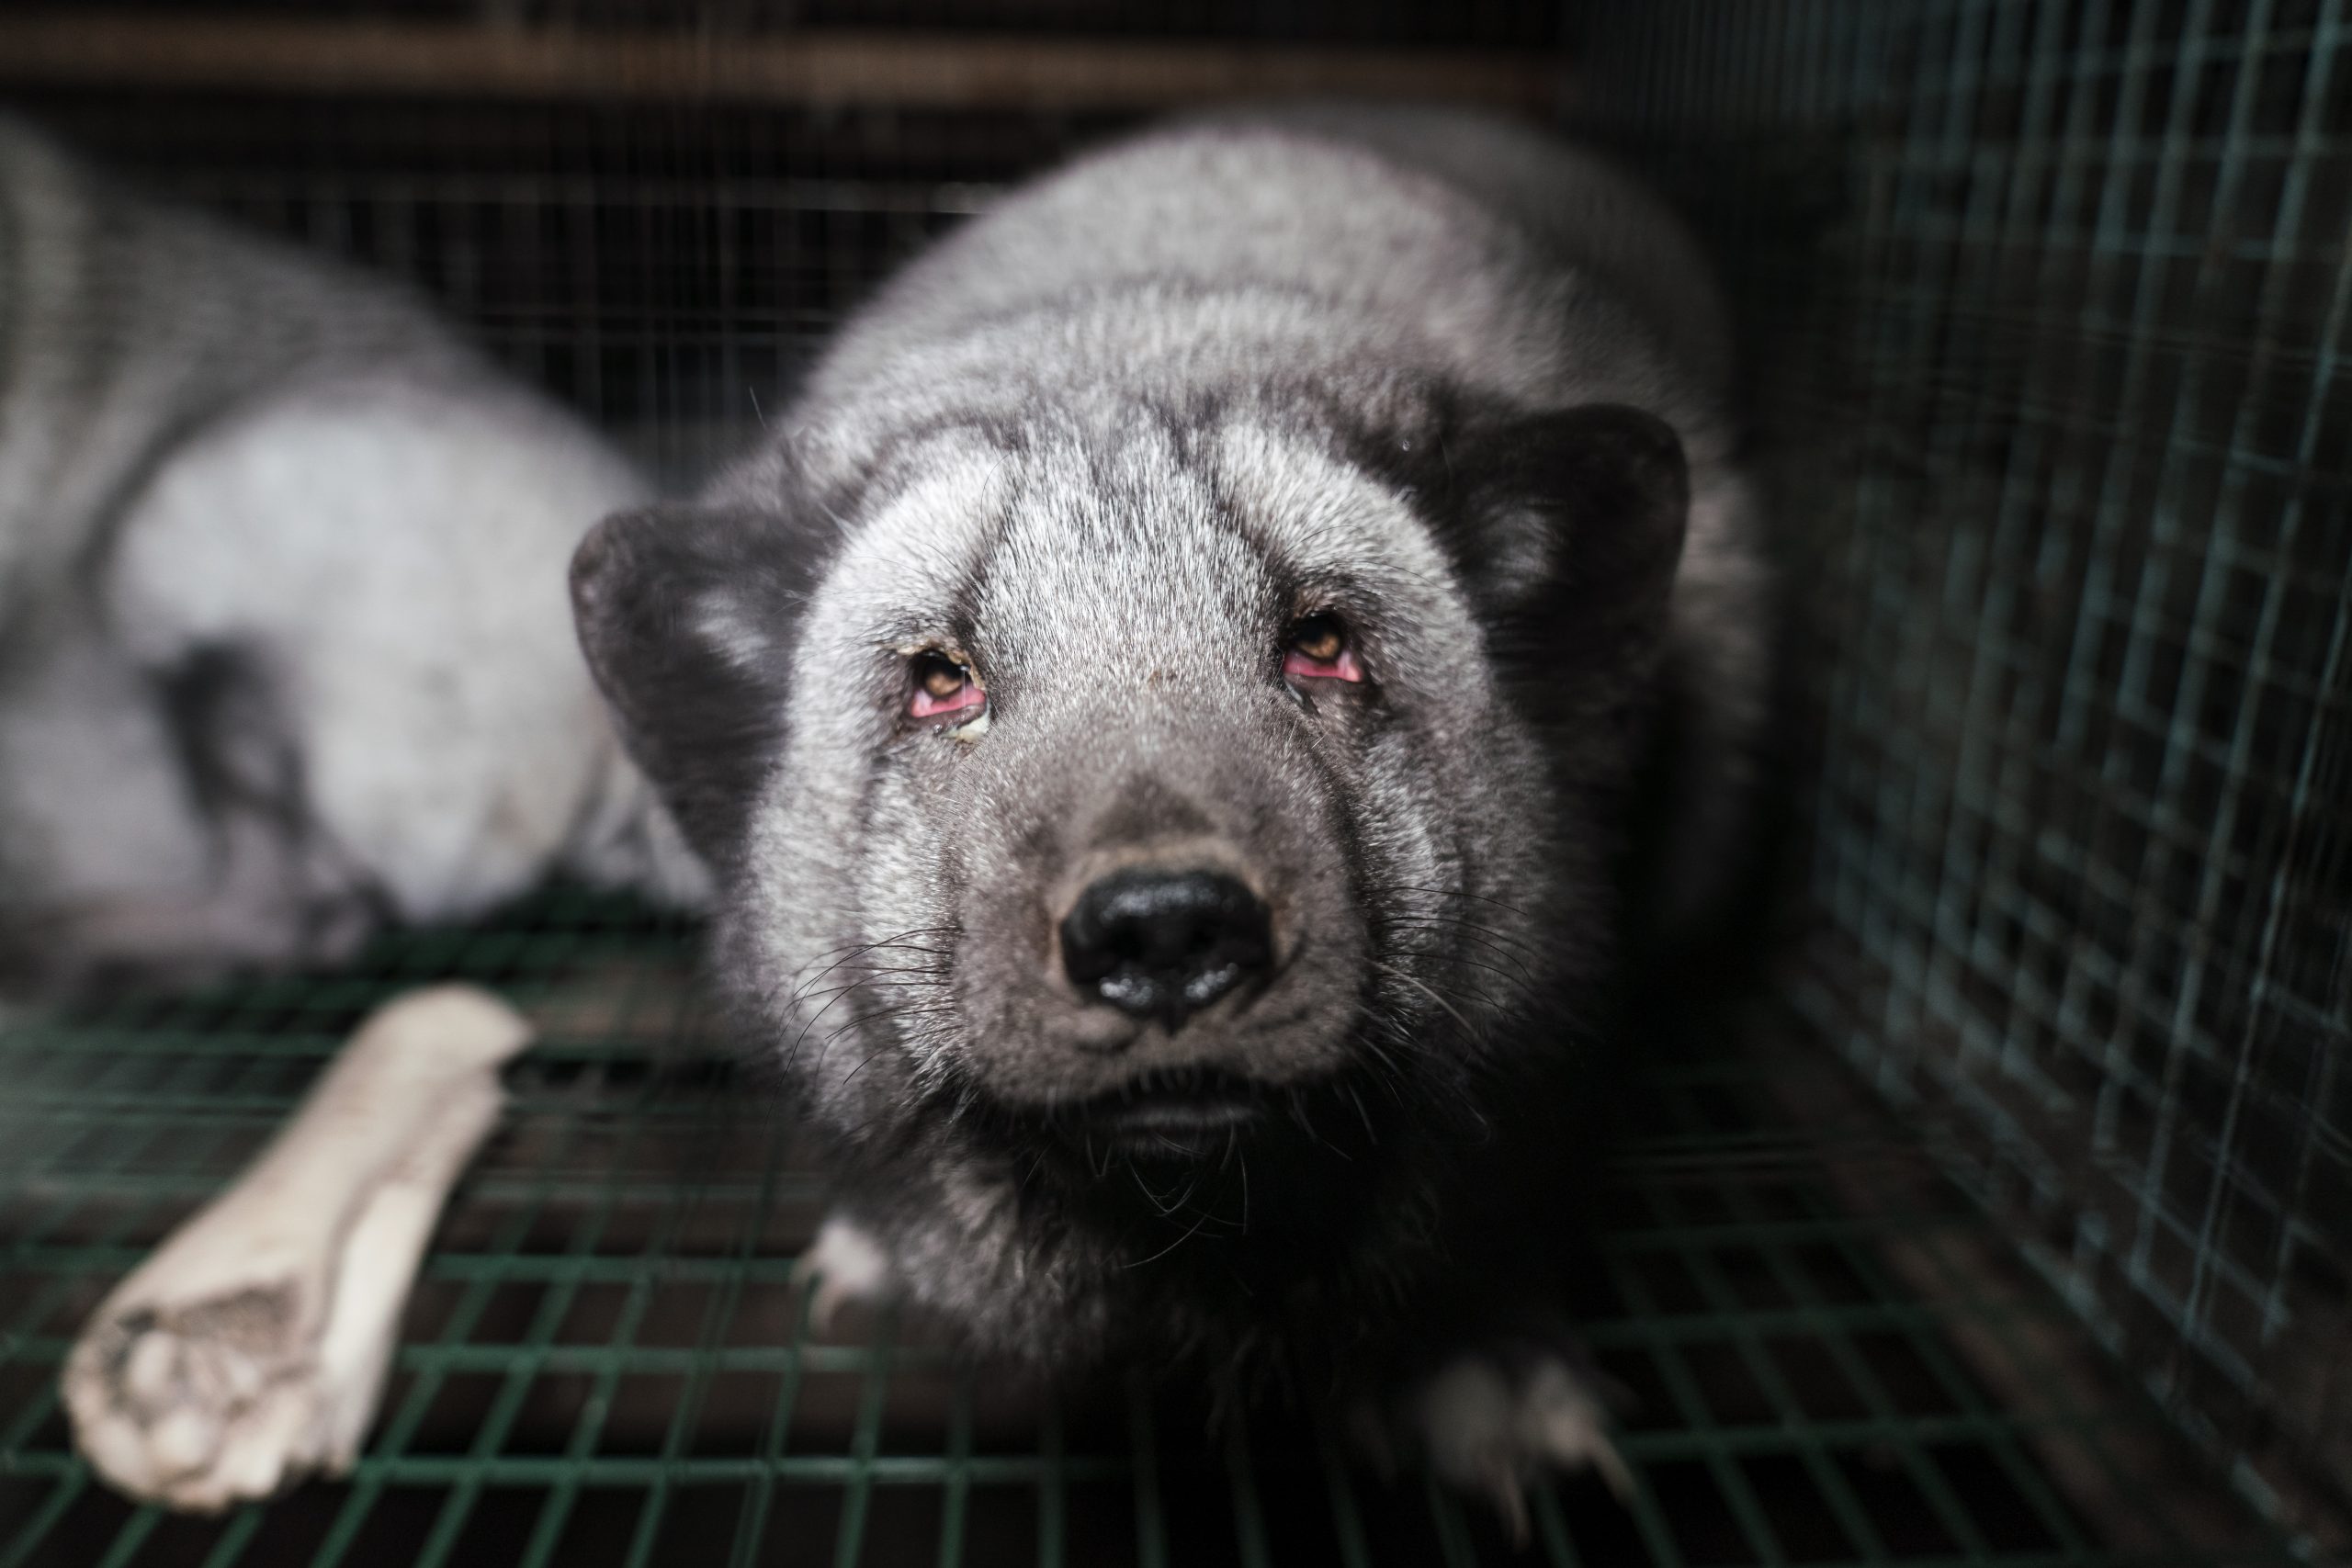 Arctic foxes on fur farms in Finland Oct 2021 show signs of deformed feet, overgrown claws, infected eyes, living in small, barren, wire cages.